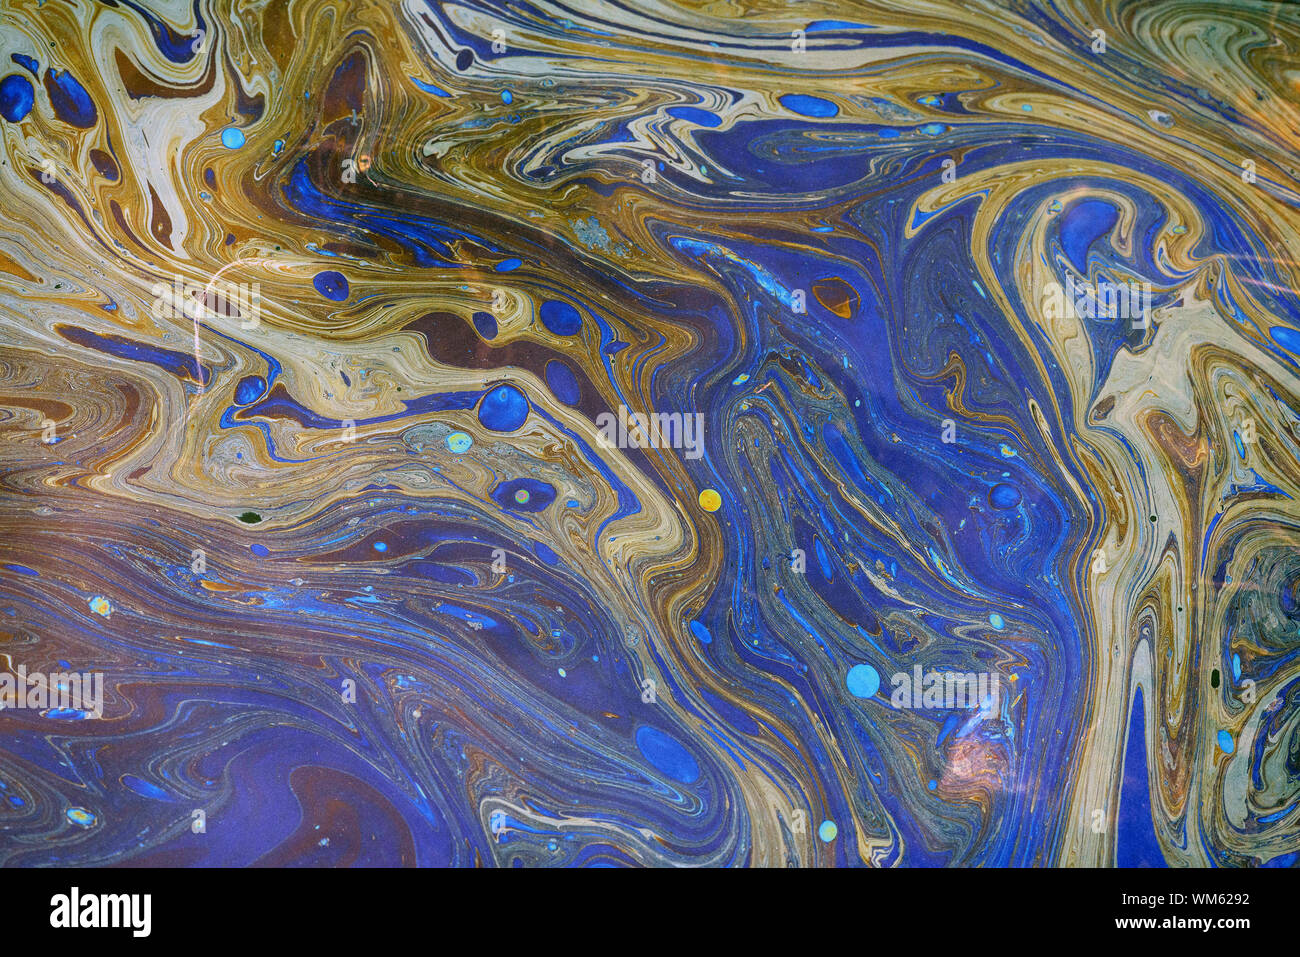 Toxic colours of oil and water in a chemical spill creating a psychedelic blur of rainbow colours. Copyspace area for environmental and pollution base Stock Photo